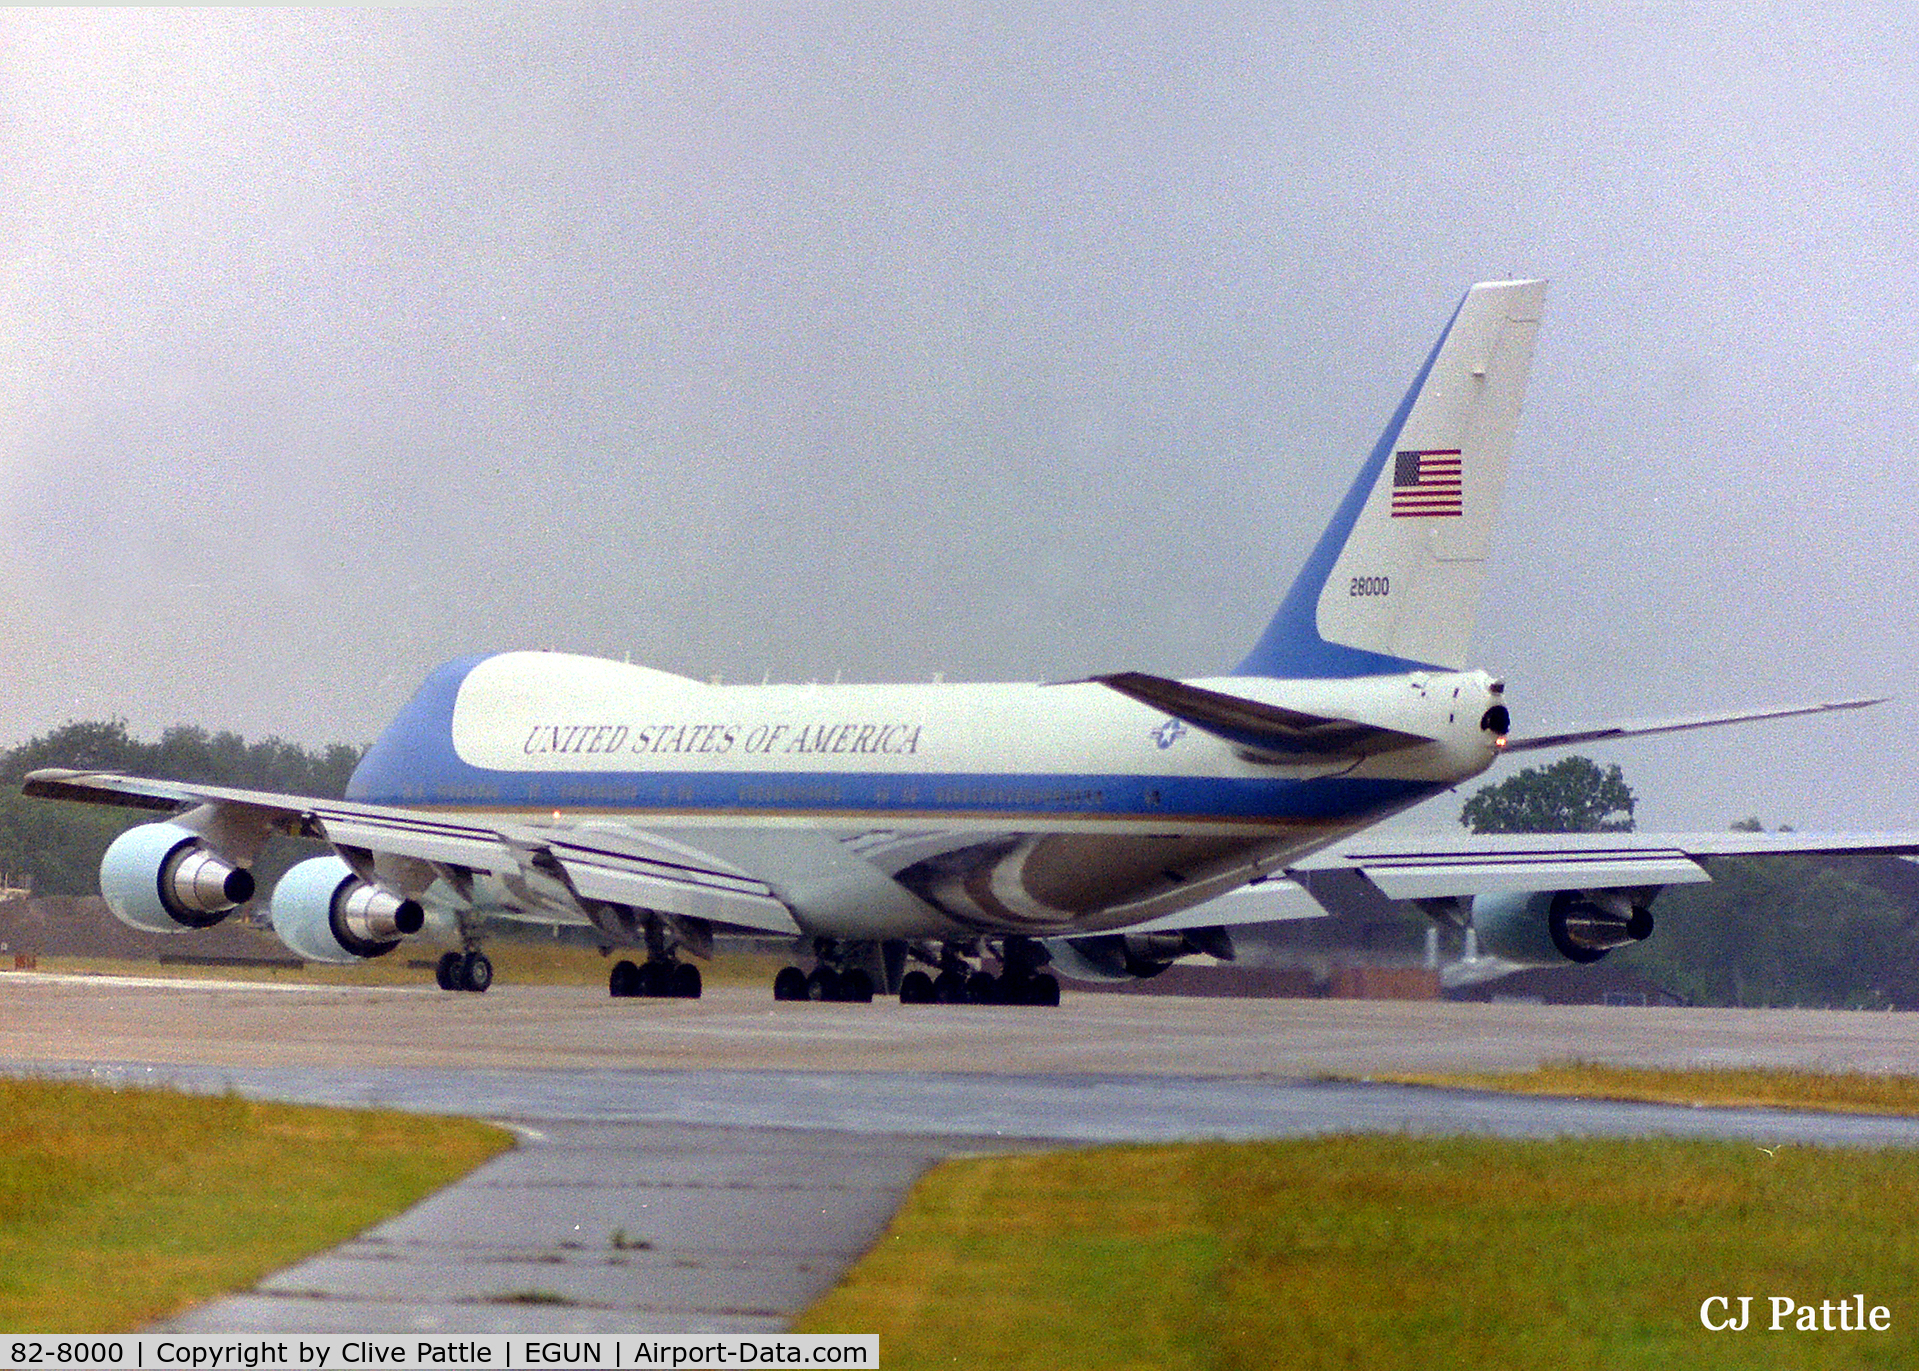 82-8000, 1987 Boeing VC-25A (747-2G4B) C/N 23824, Taxying out from RAF Mildenhall in the mid -90's